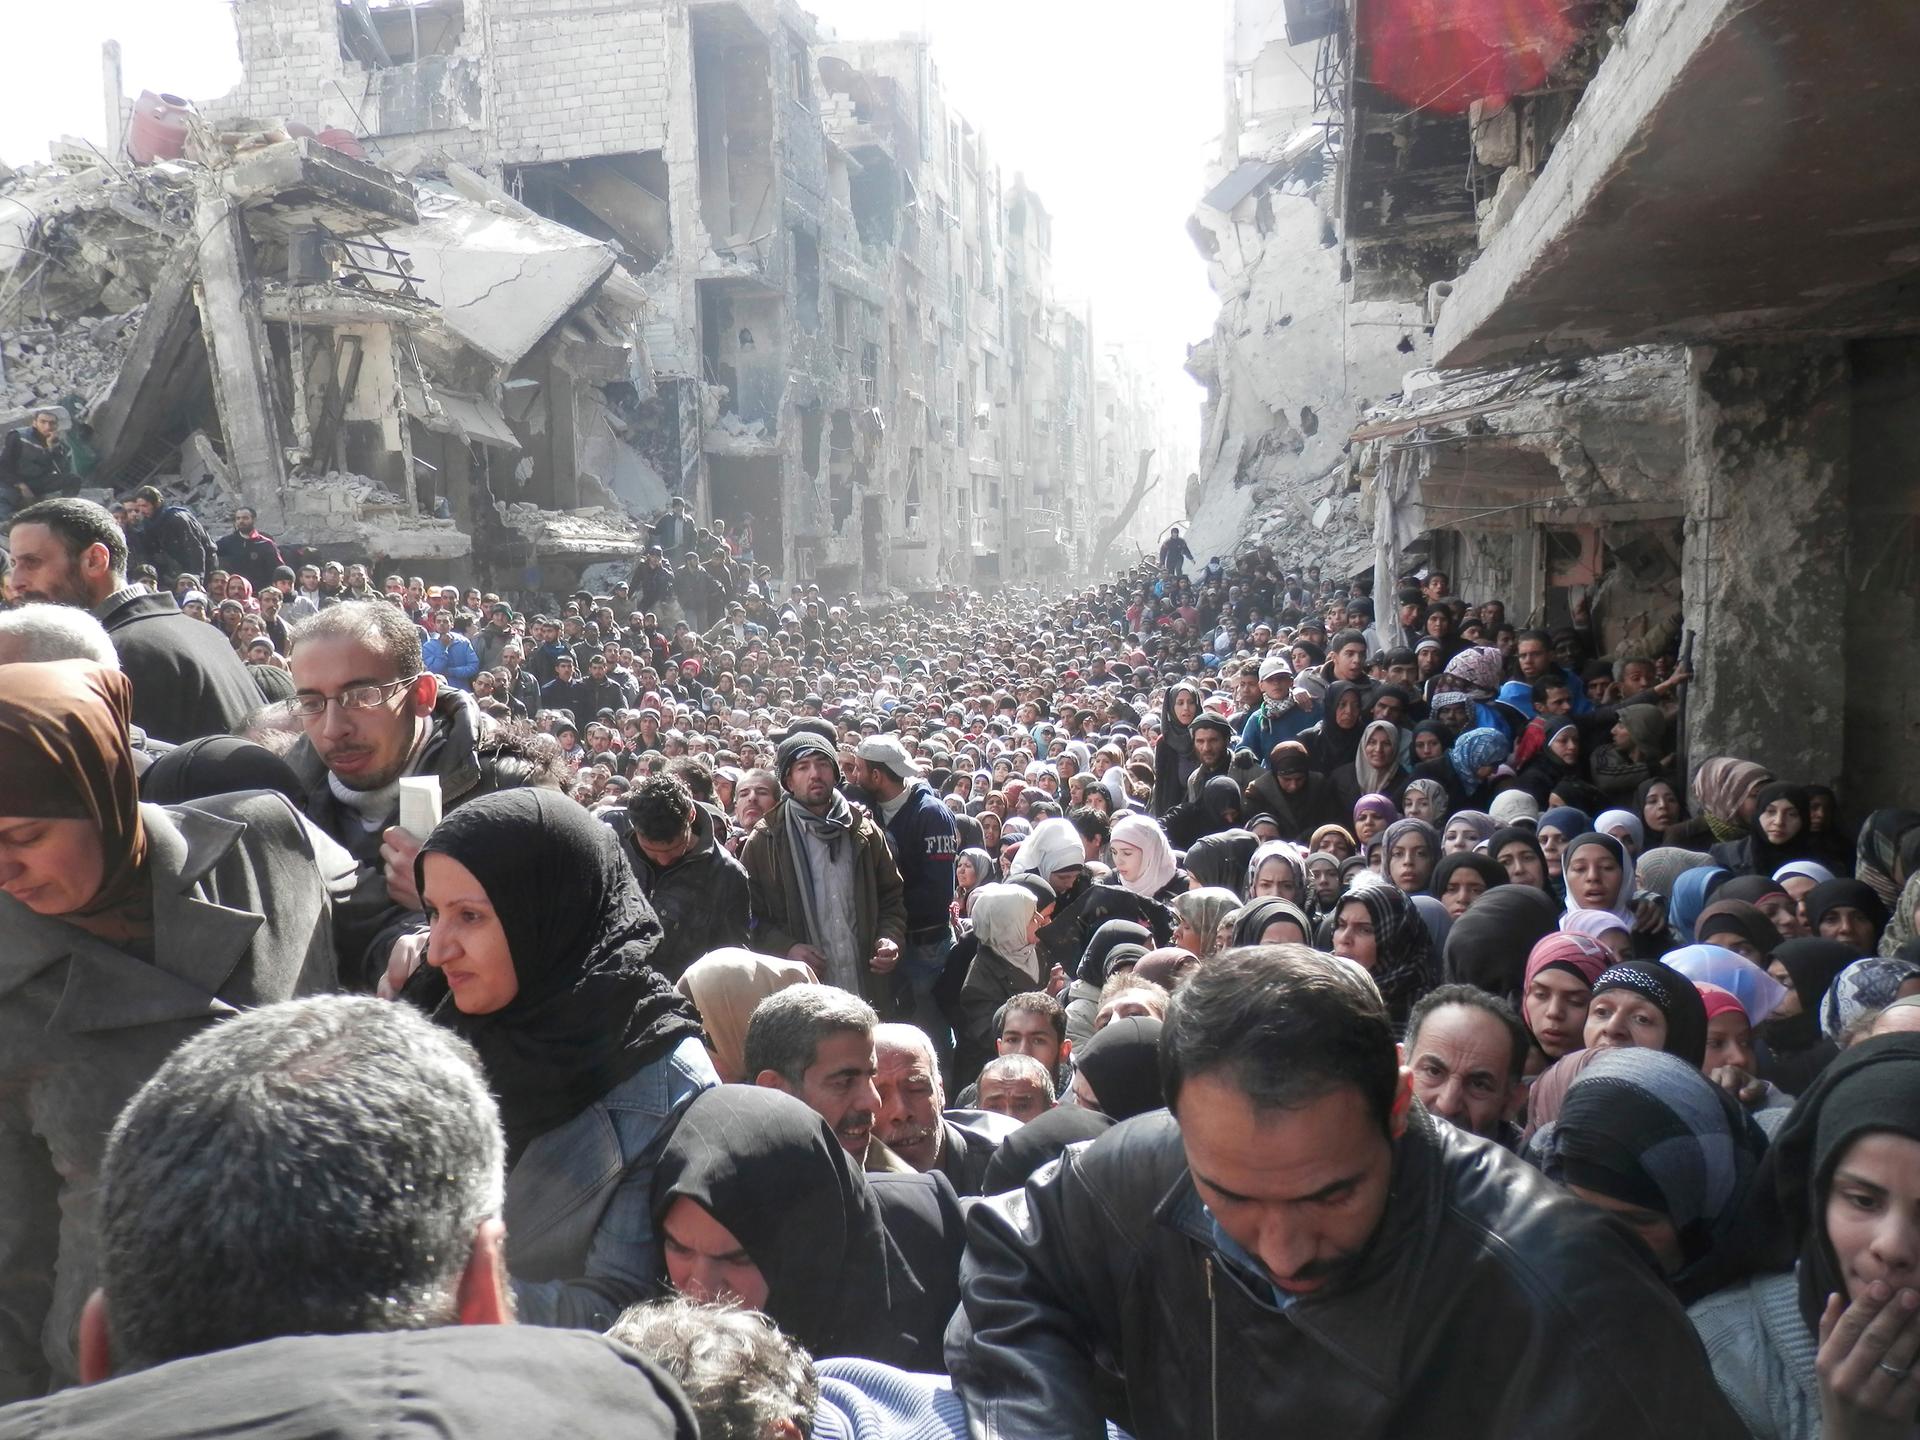 Residents wait to receive food aid distributed by the U.N. Relief and Works Agency (UNRWA) at the besieged al-Yarmouk camp, south of Damascus